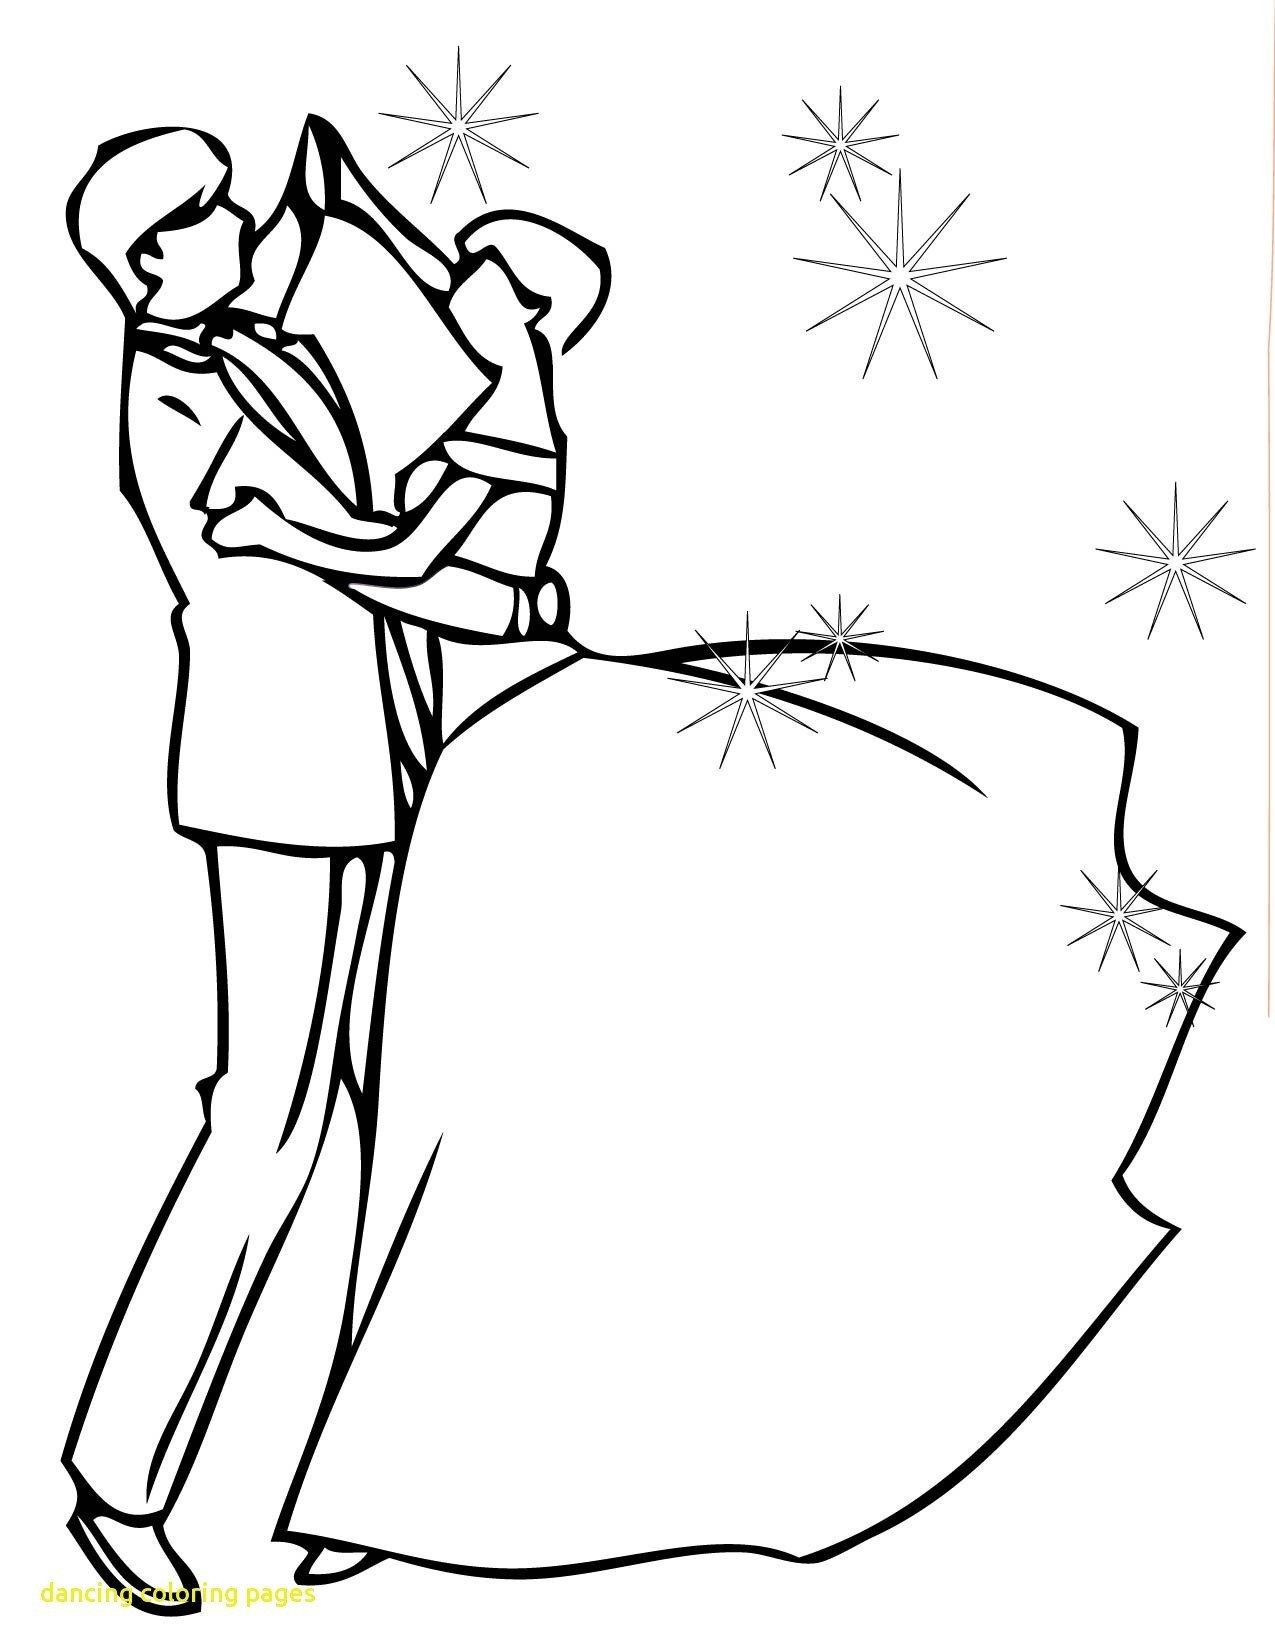 Dancing Coloring Pages Coloring Dance Coloring Pages Best For Dance Coloring Pages